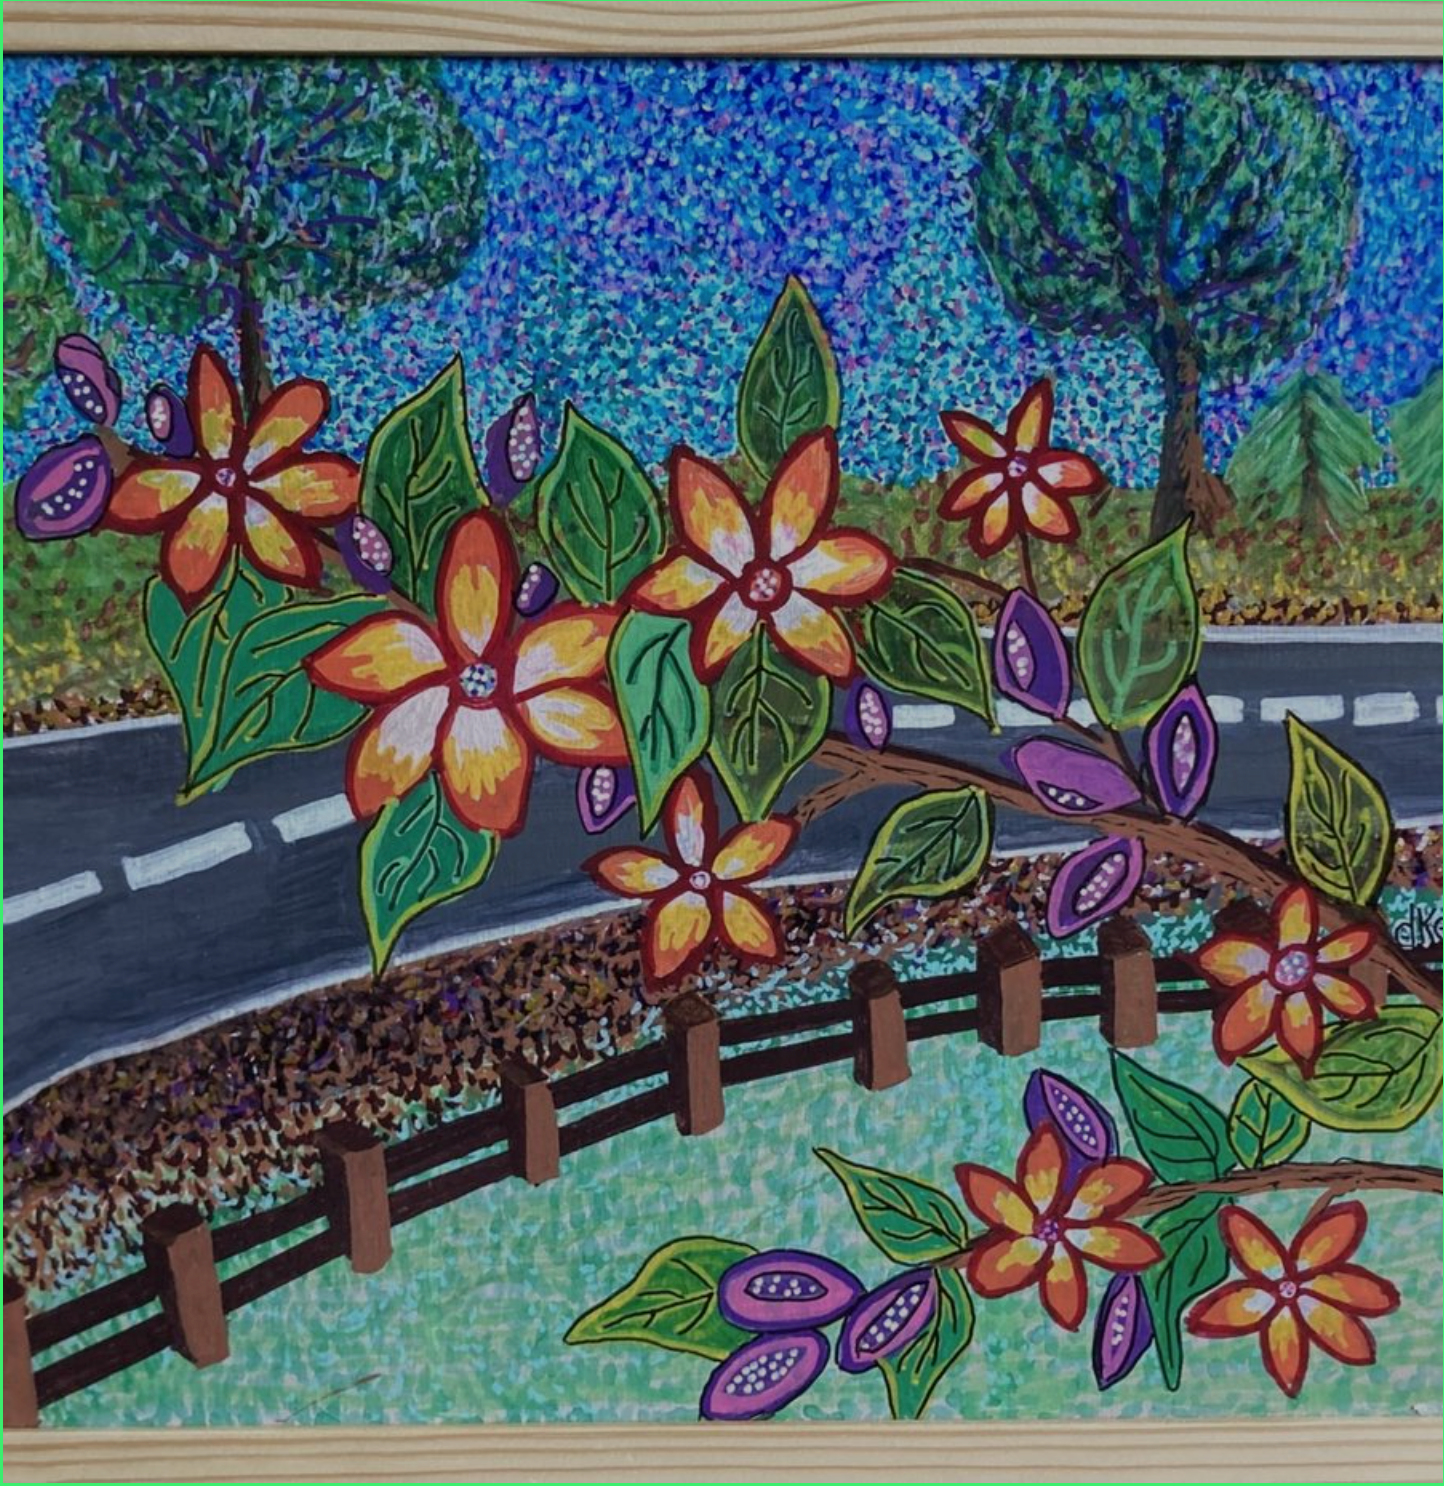 art painting with colorful flowers by the side of the road